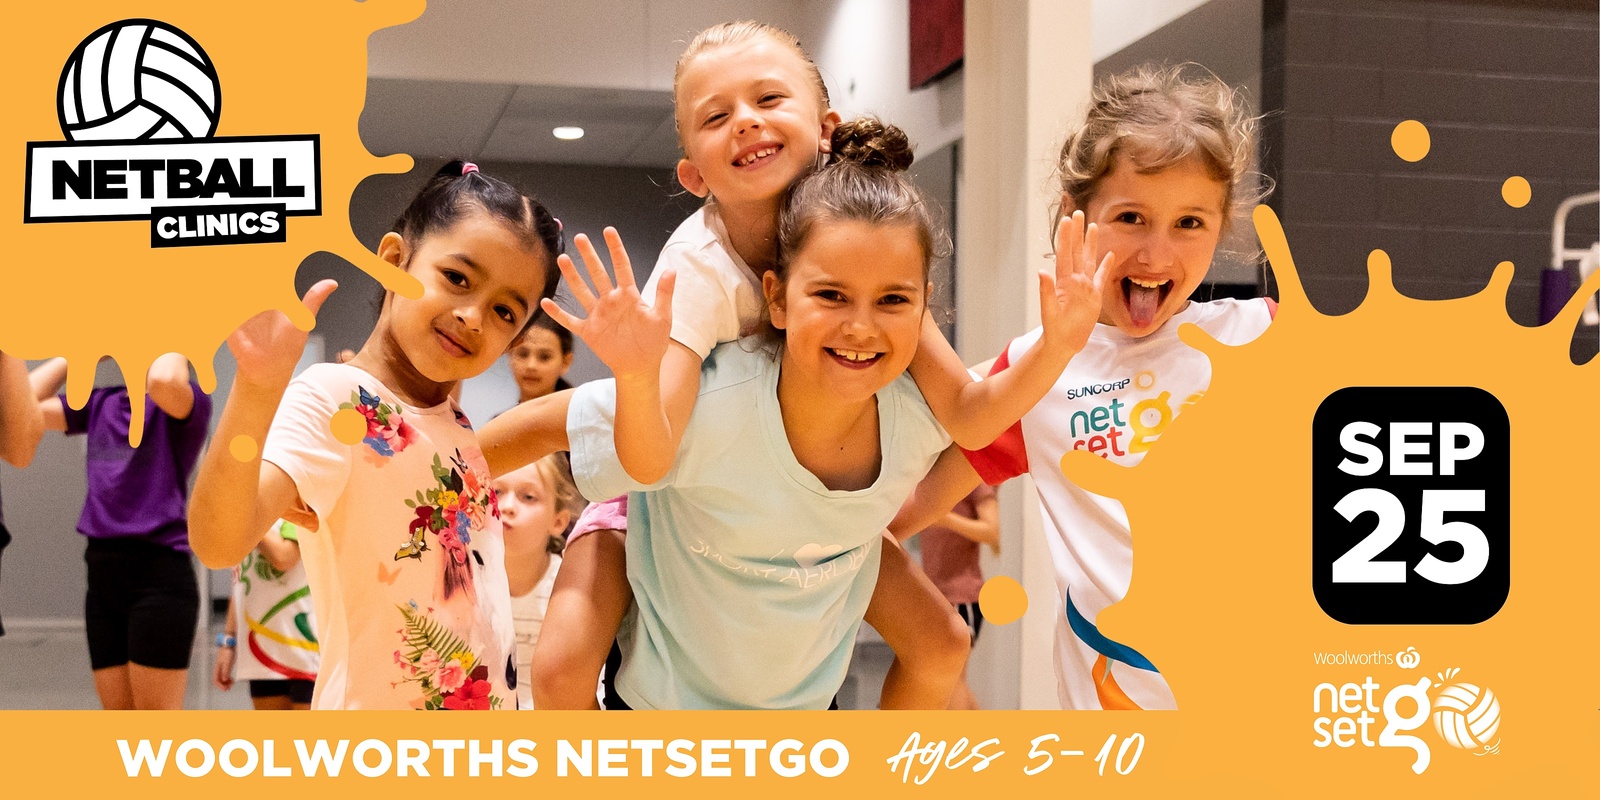 Banner image for WOOLWORTHS NETSETGO CLINIC (25 SEP) - NISSAN ARENA - AGES 5 - 10